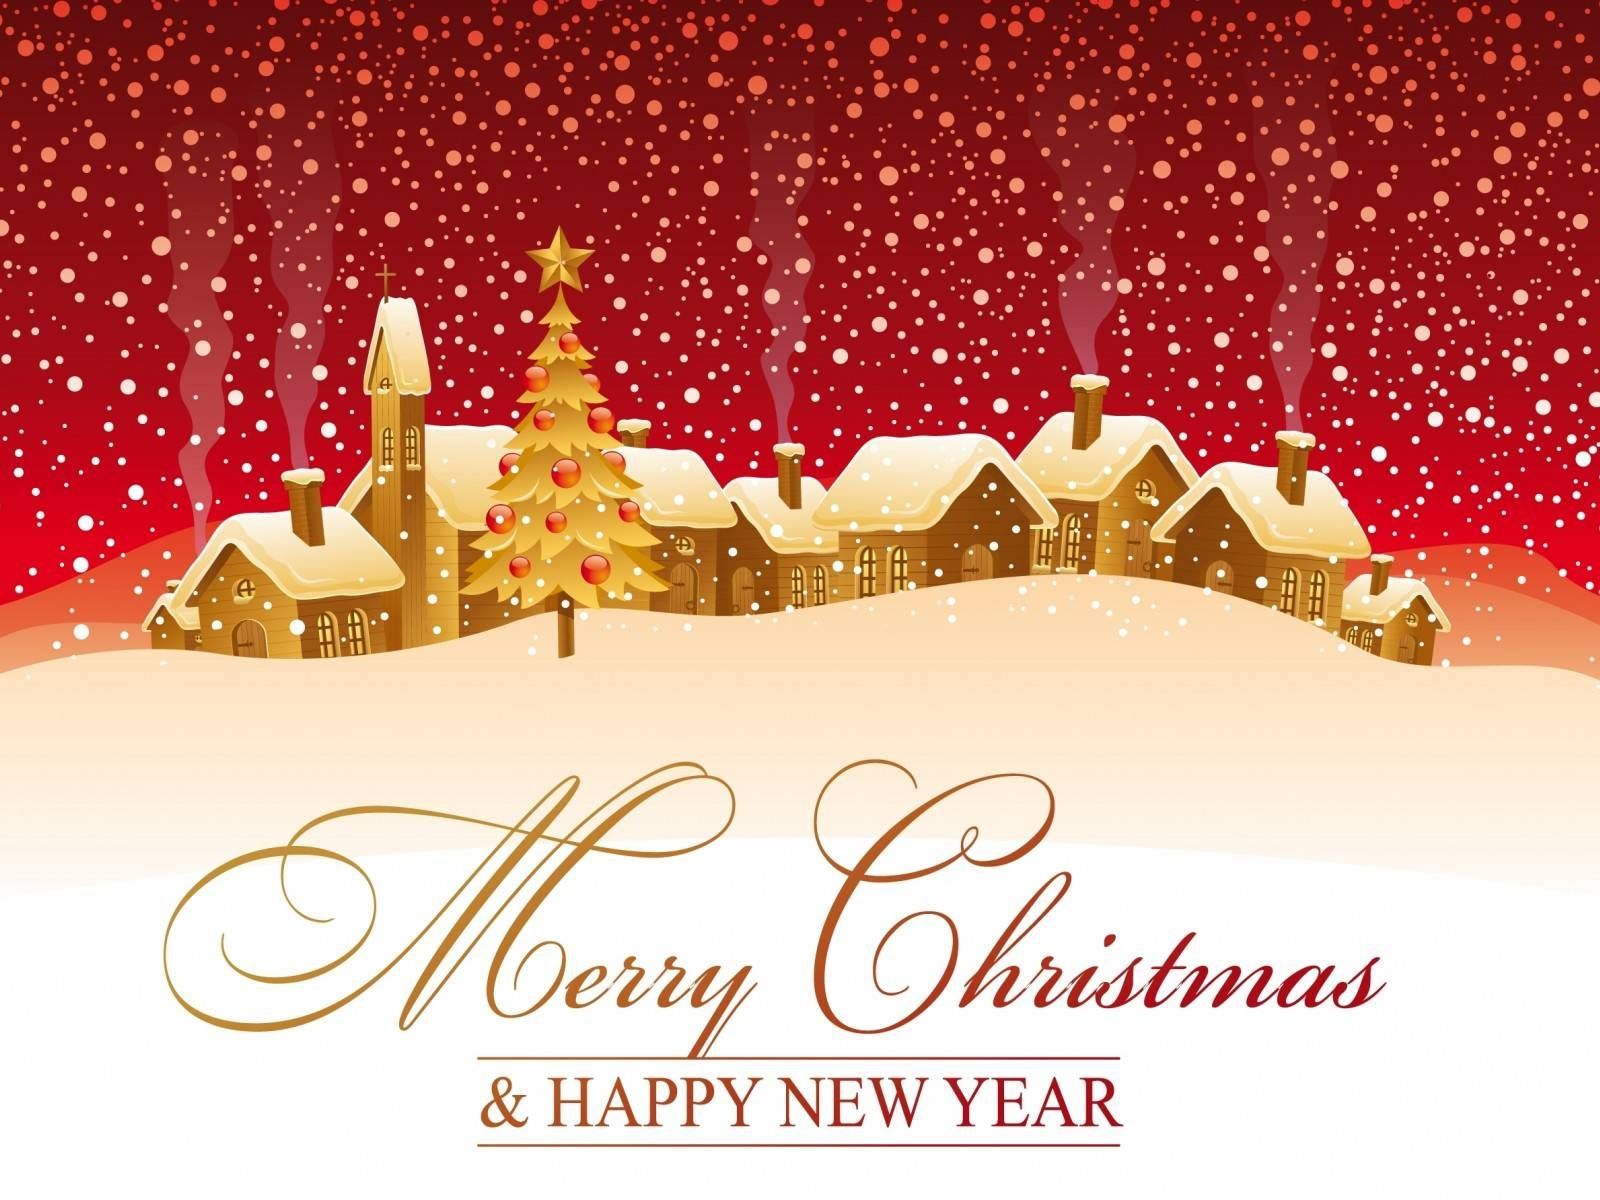 Merry christmas wallpaper 2015 free download. Merry christmas wallpaper, Merry christmas card greetings, Happy new year wallpaper